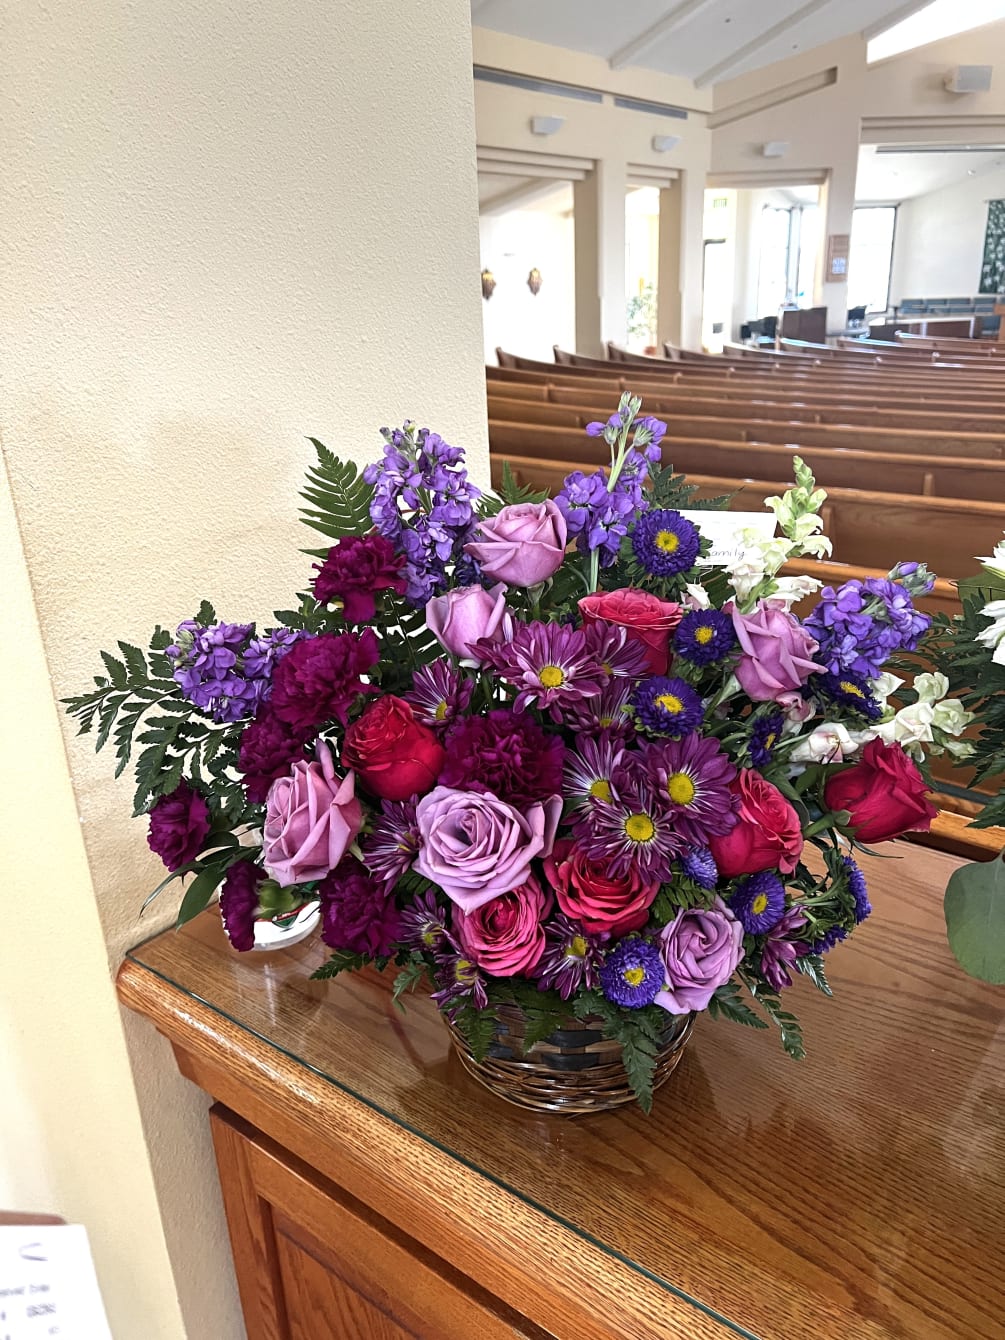 A Violet inspired vase arrangement for your loved one, featuring a mix